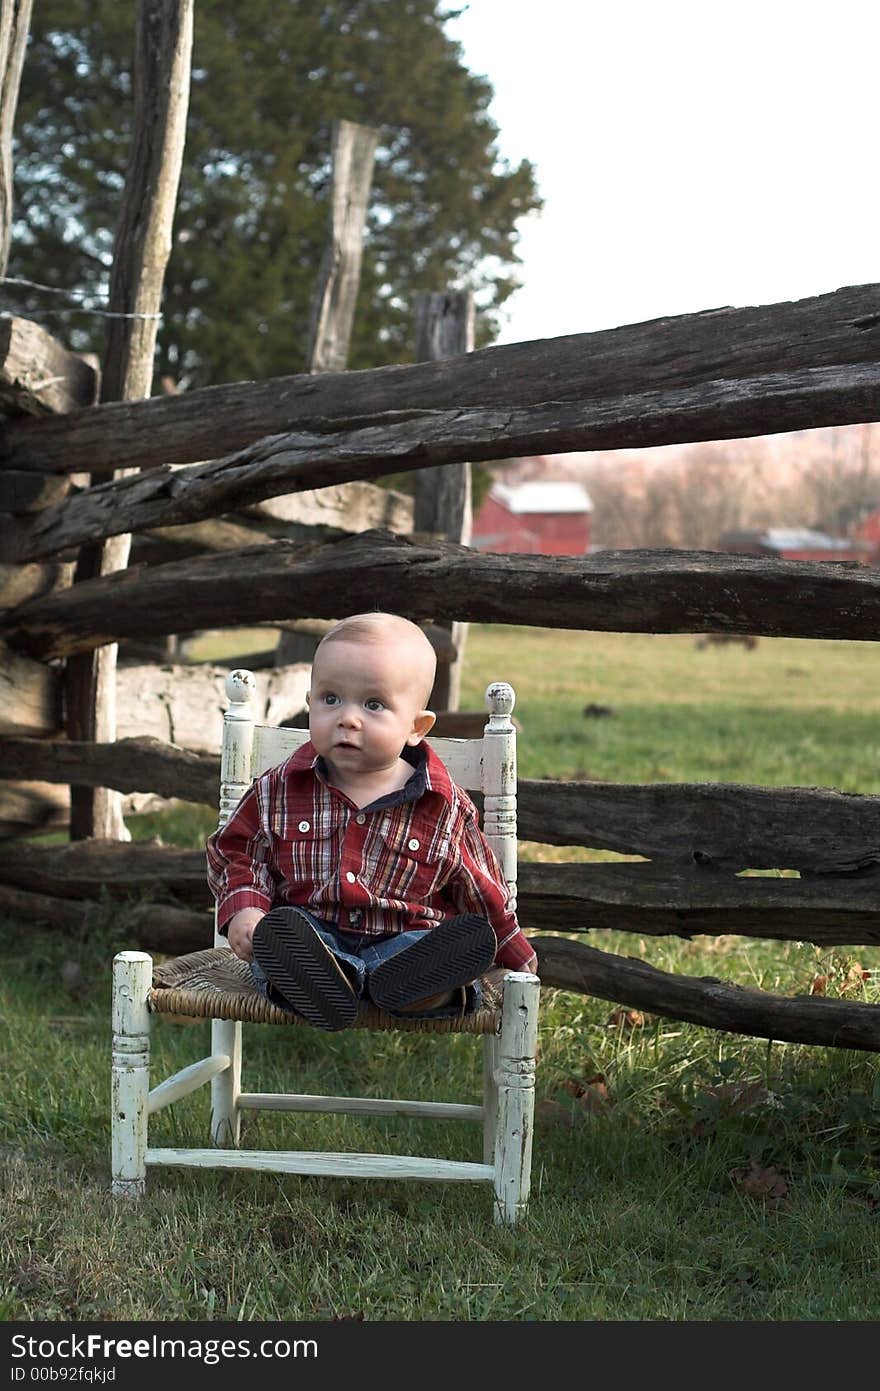 Image of baby boy sitting on a chair in front of a fence. Image of baby boy sitting on a chair in front of a fence